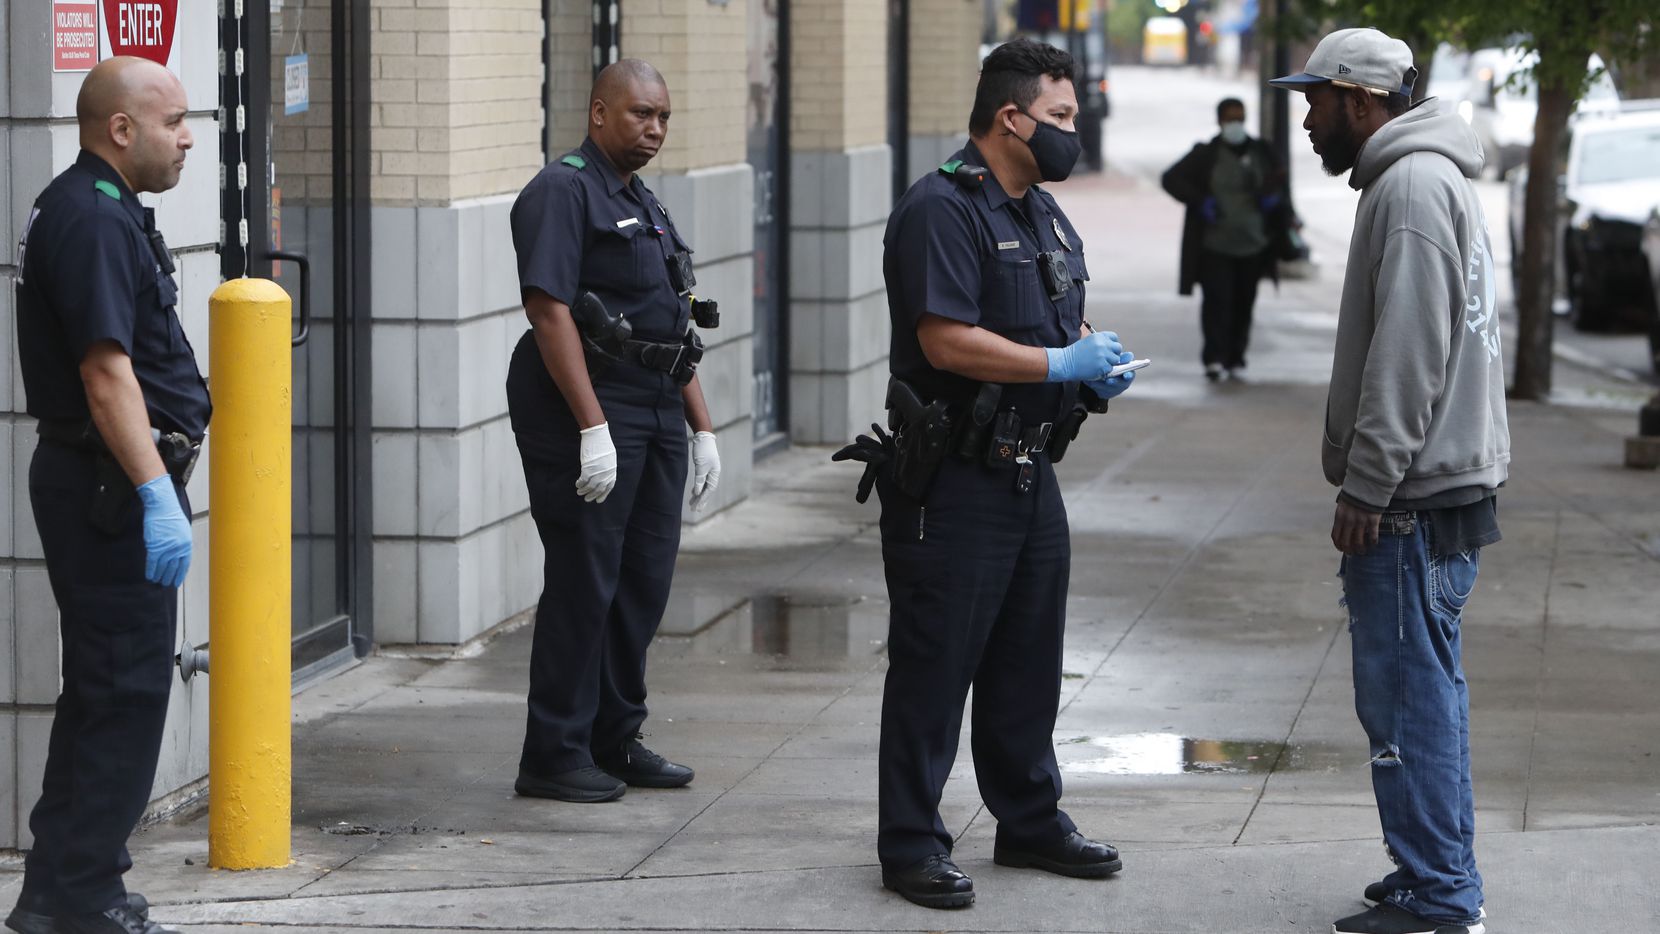 Practicing social distancing amid COVID-19 concerns, police officers speak with a man in...